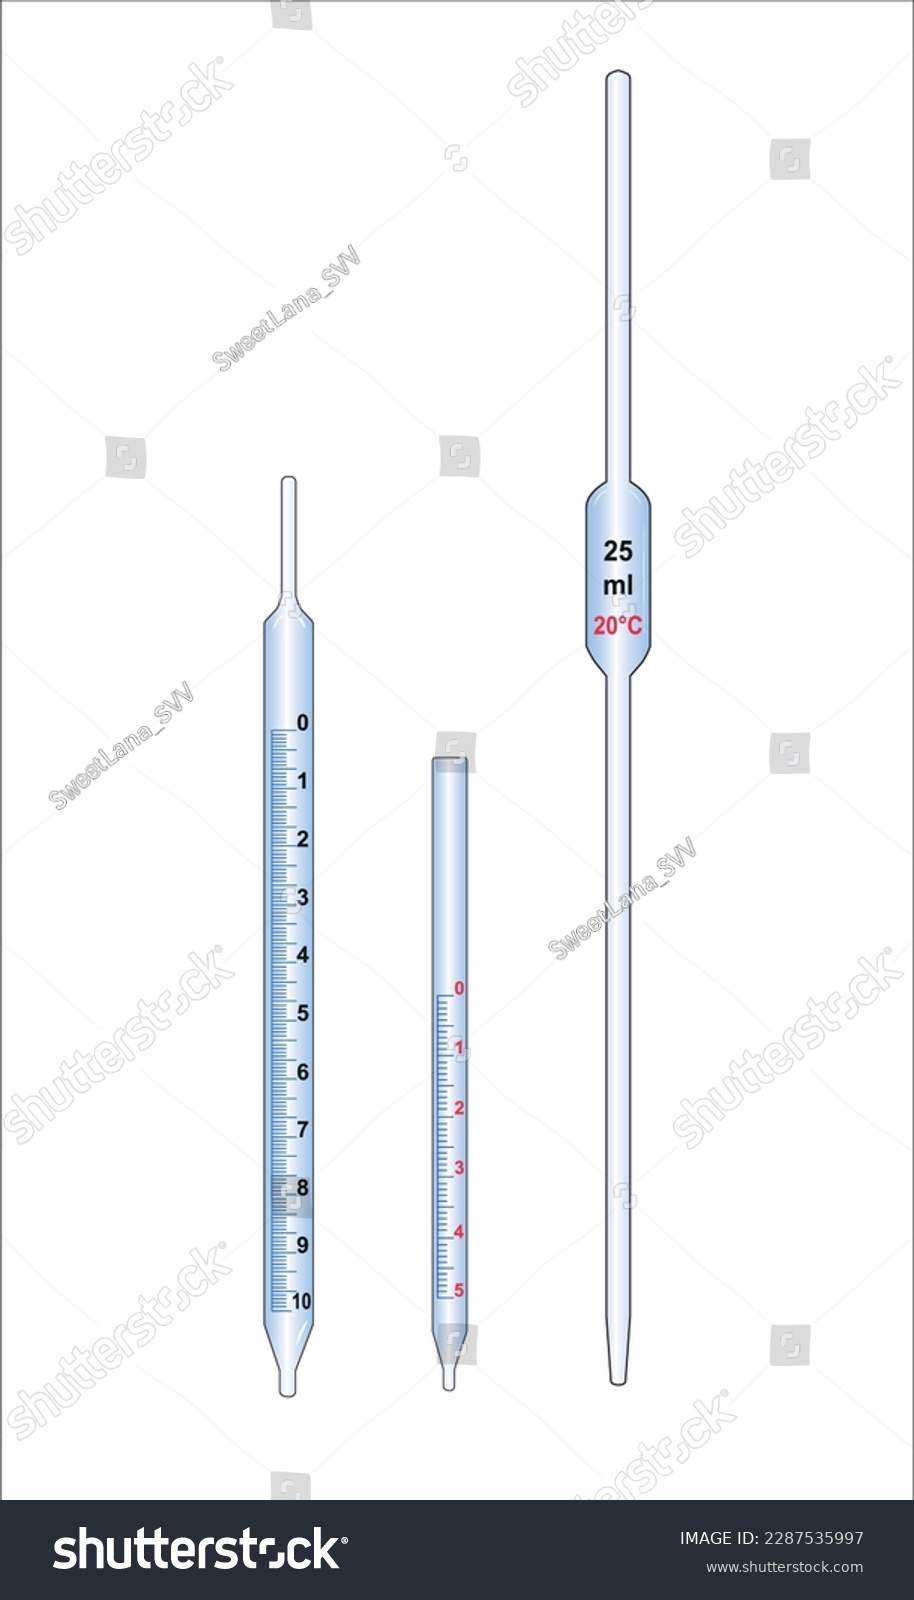 2D illustration of two graduated pipettes, 10 ml, 5 ml and a Mohr pipette 25 ml #2287535997